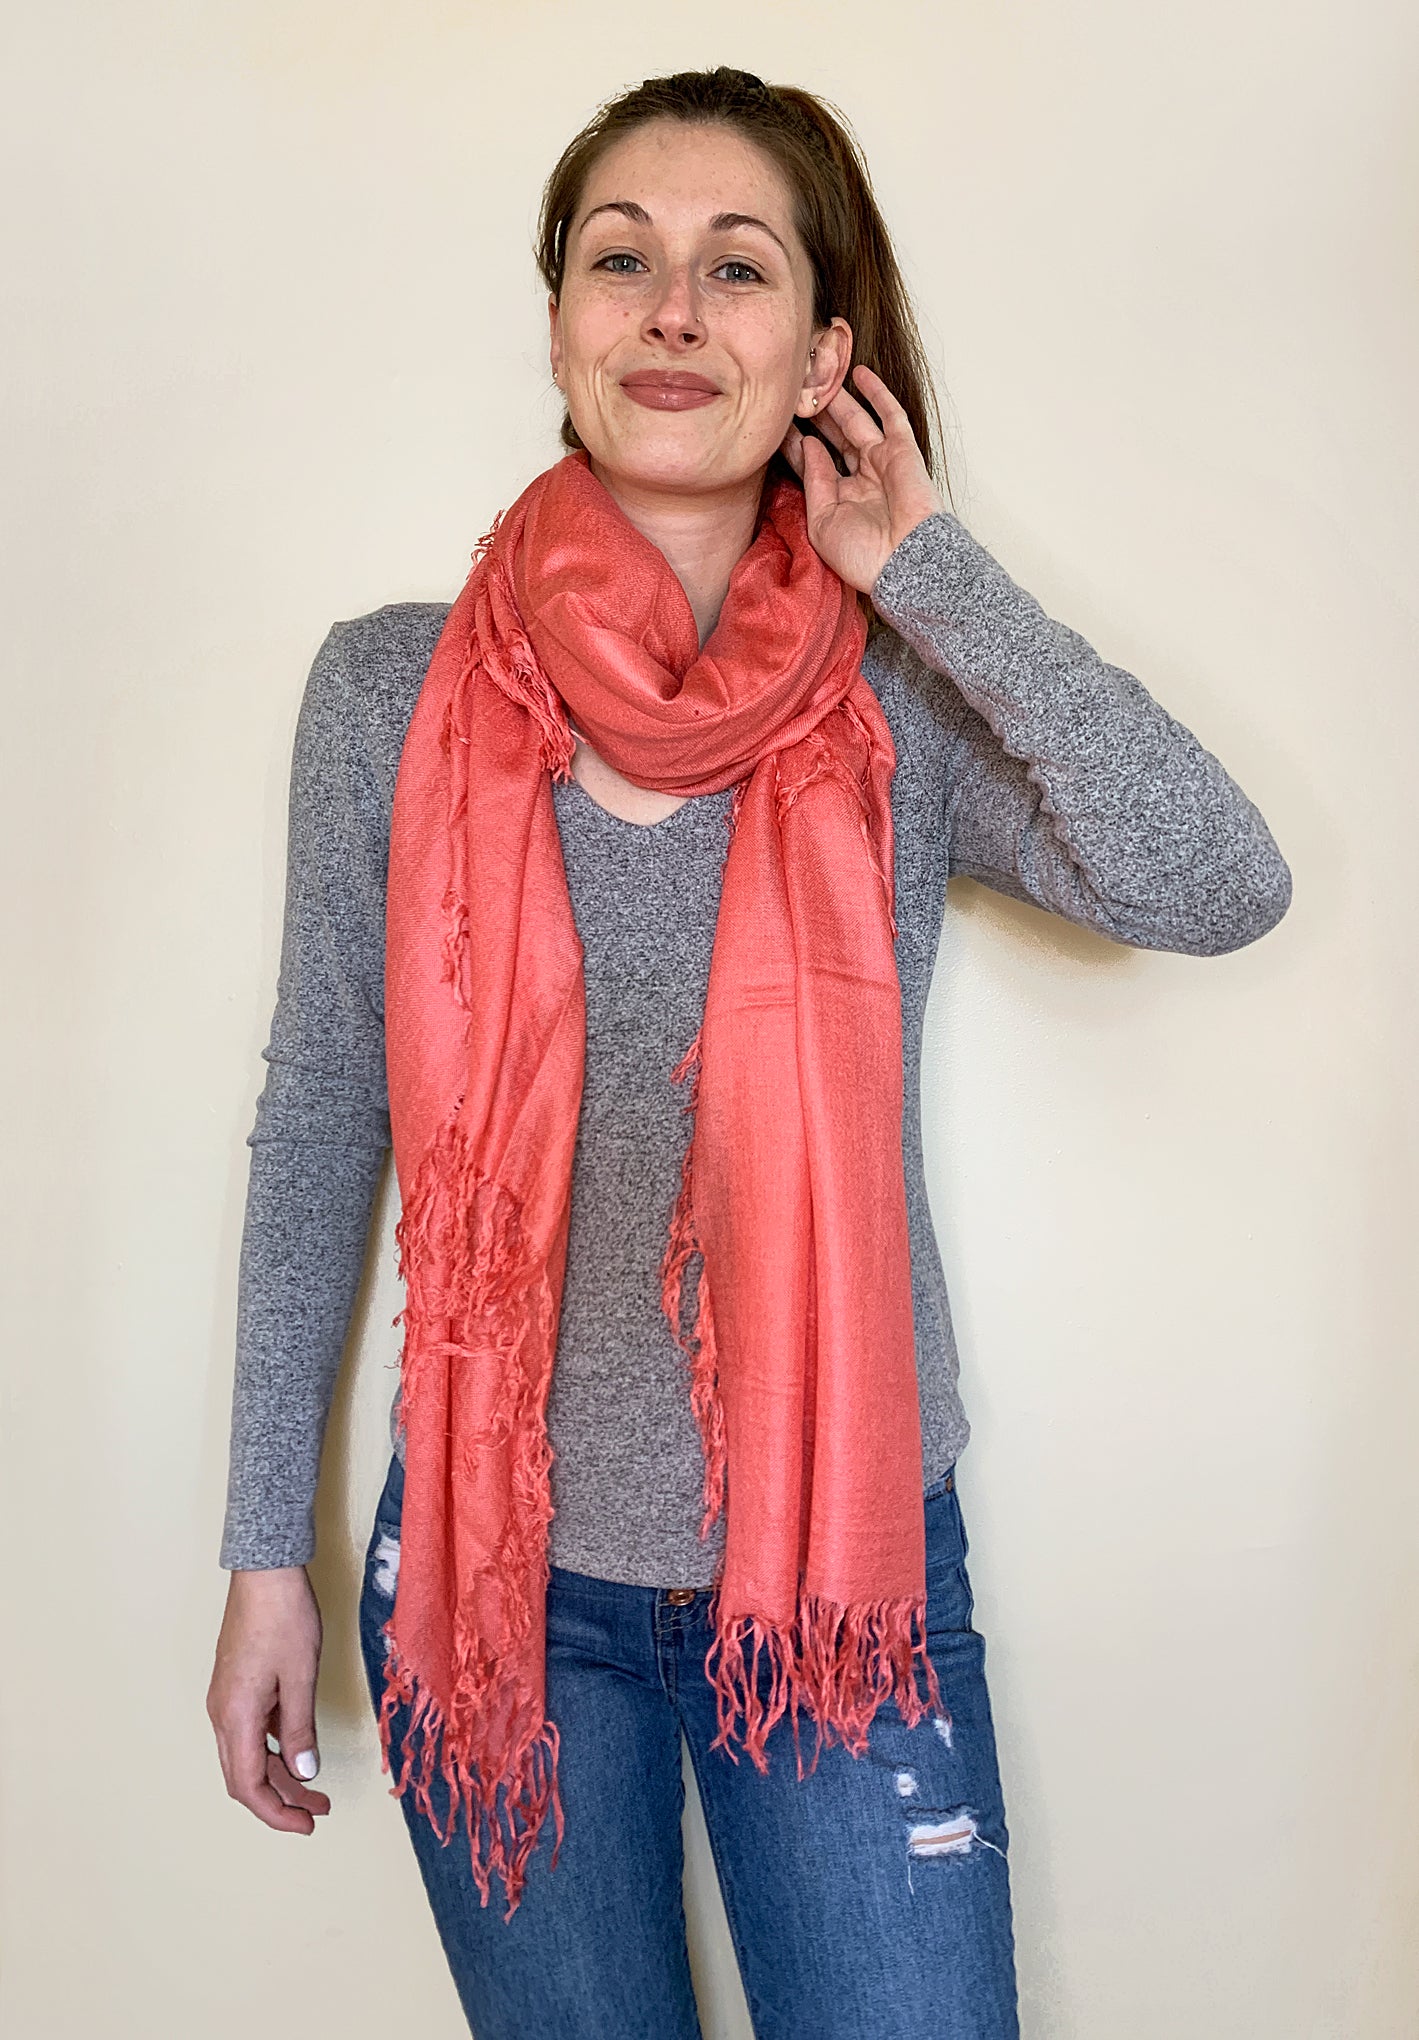 Blue Pacific Tissue Solid Modal and Cashmere Scarf Shawl in Tea Rose Pink